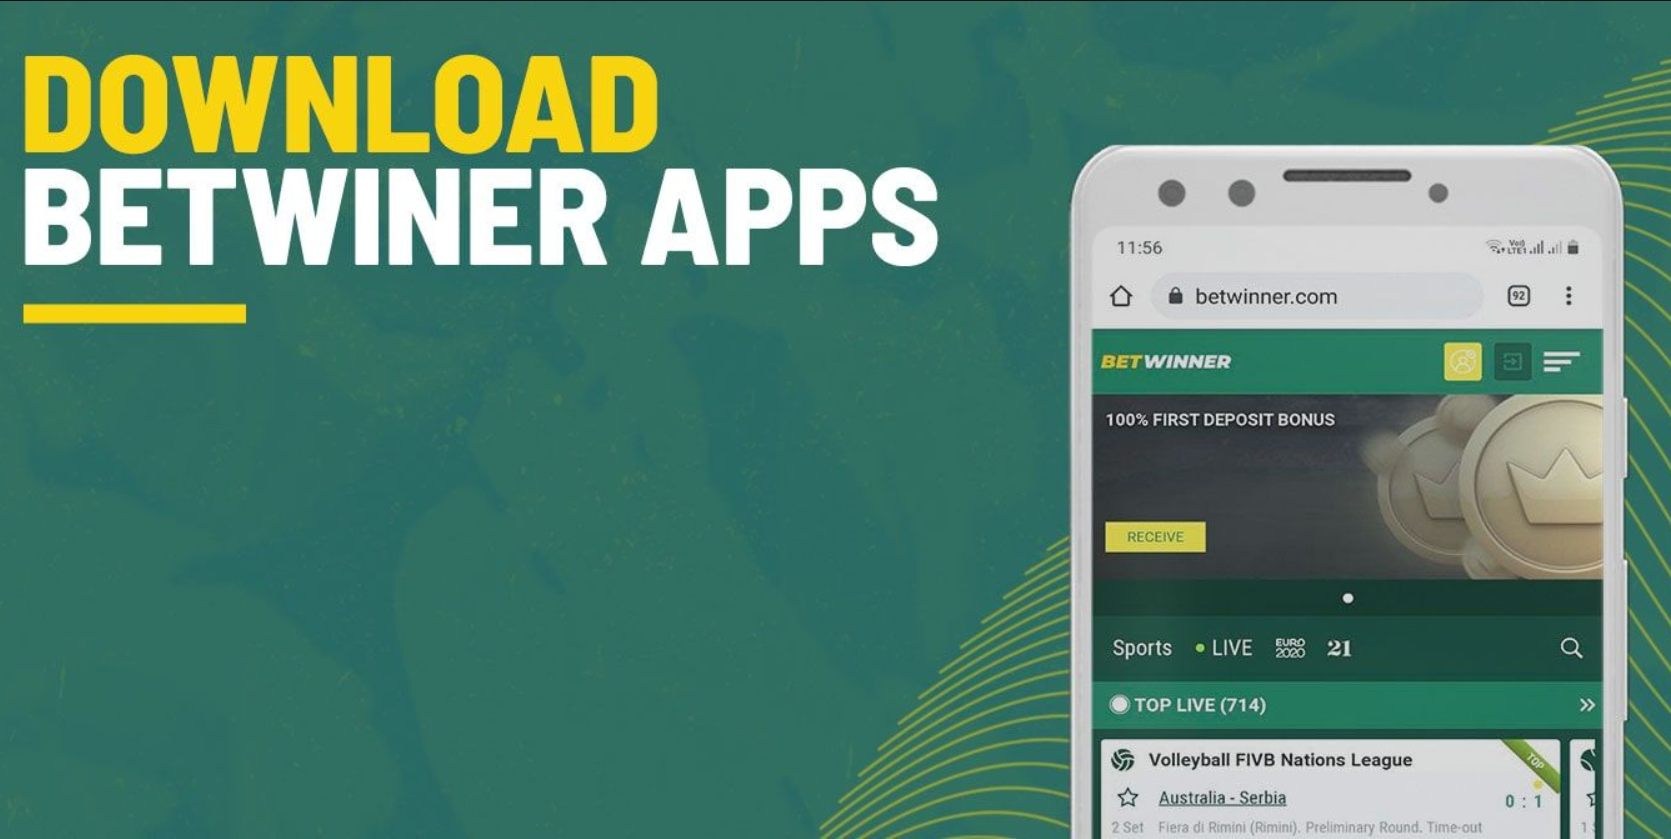 What are the benefits of betting at the BetWinner South Africa via the app?